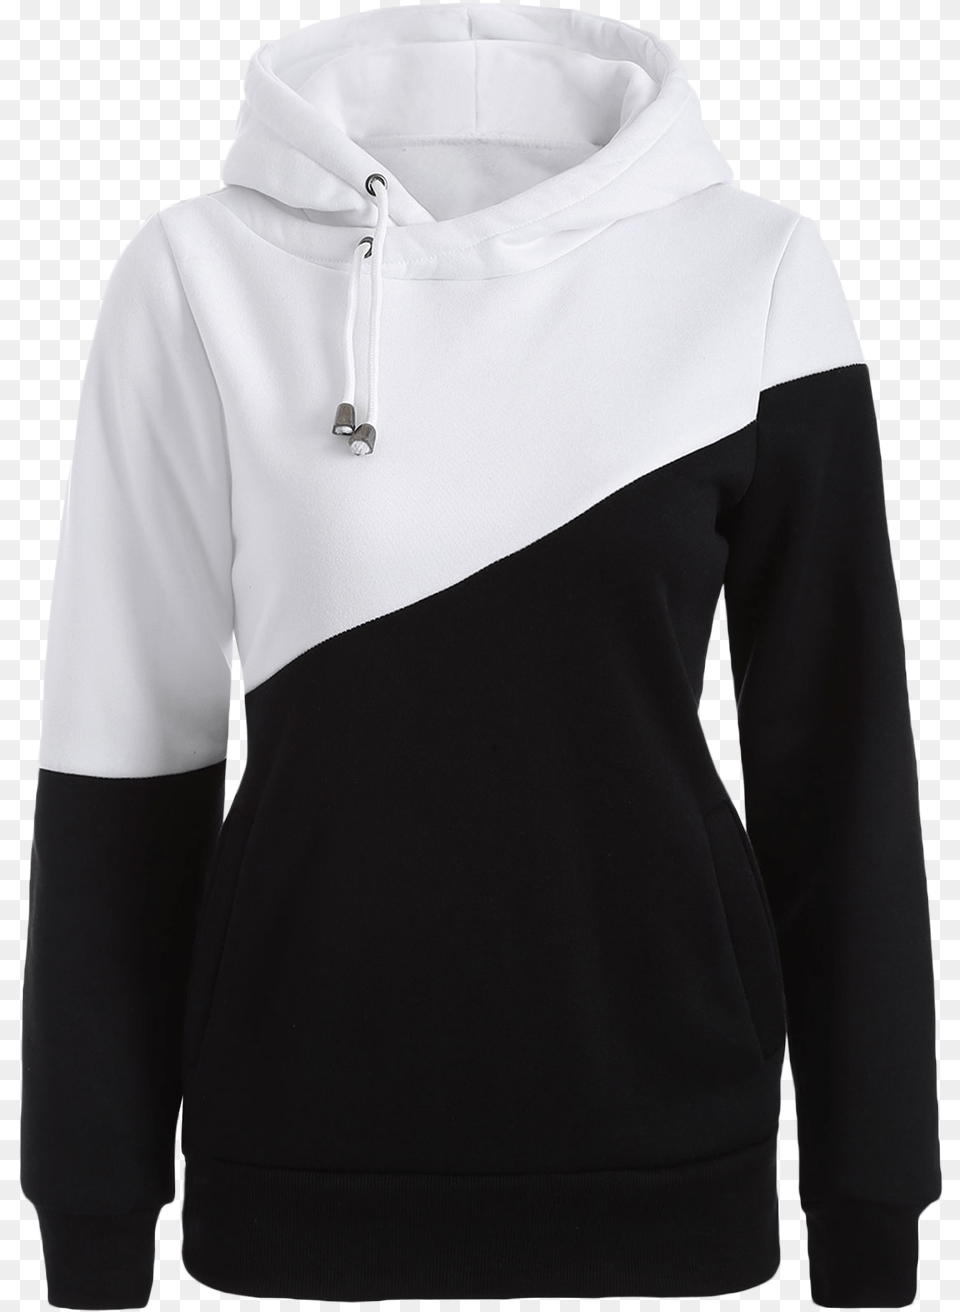 Screened By The Chinabrands Platform You39ve Already Deportivos Blanco Y Negro, Clothing, Hood, Hoodie, Knitwear Png